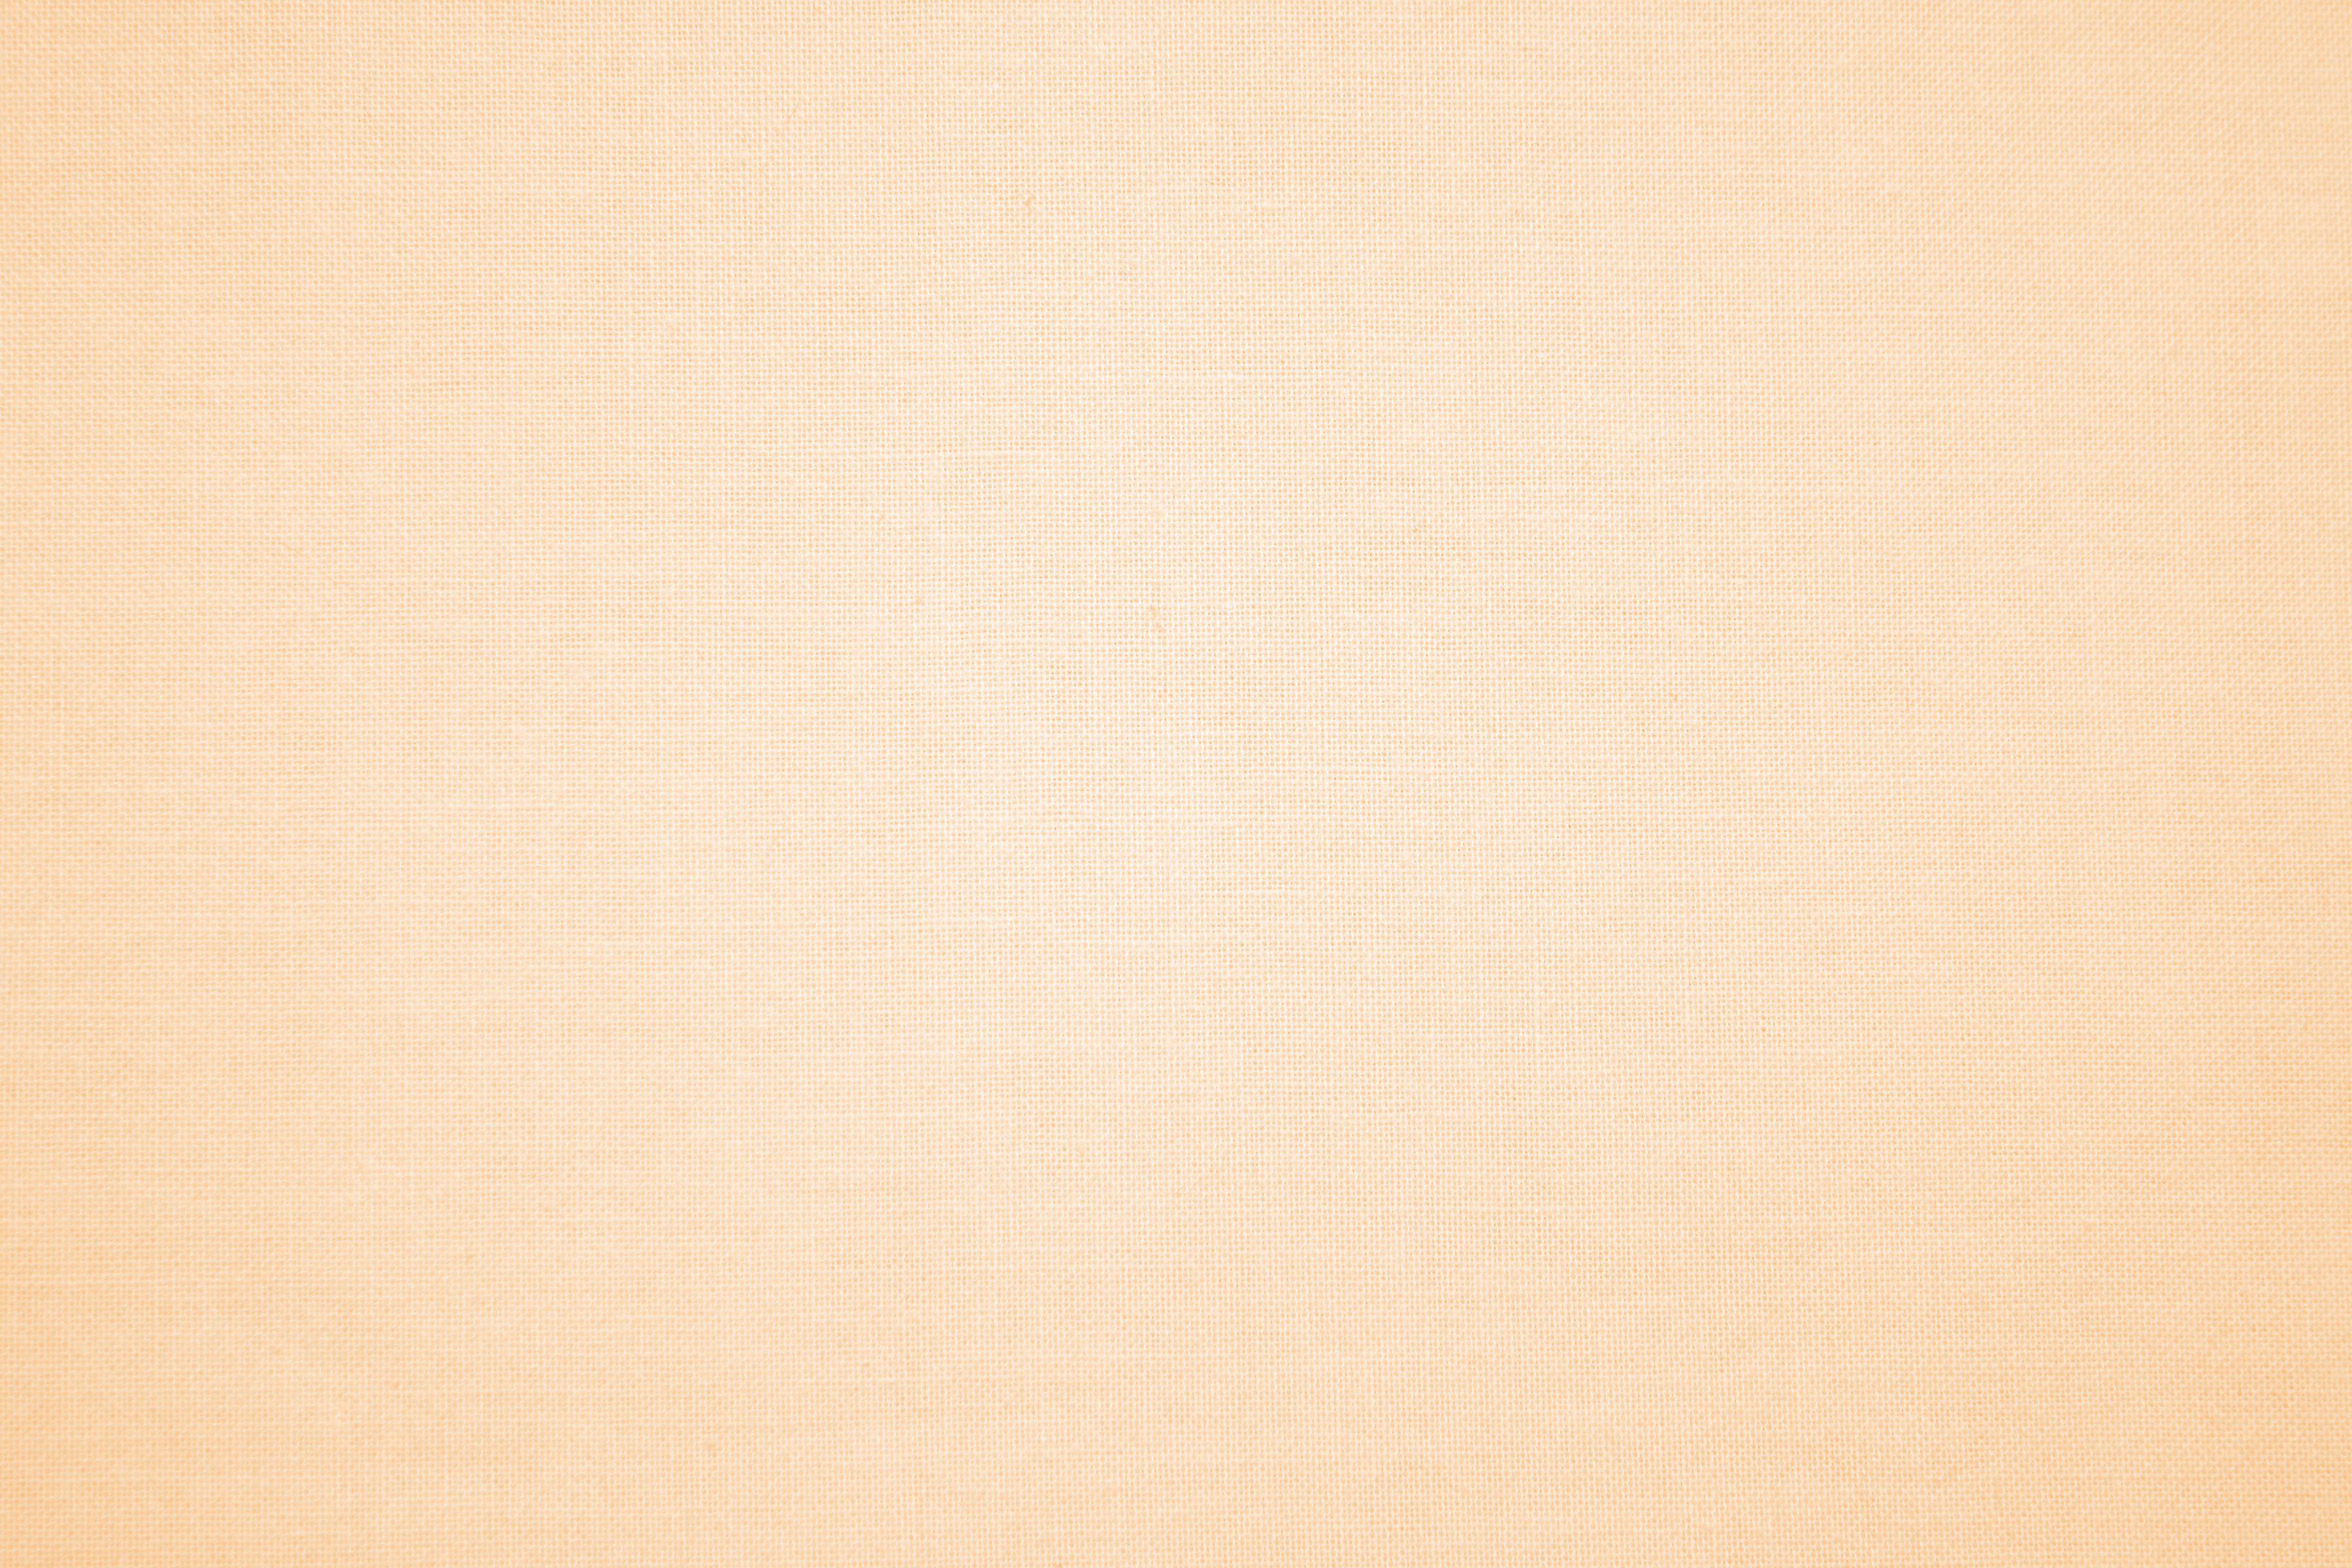 Peach Colored S Fabric Texture Picture Photograph Photos